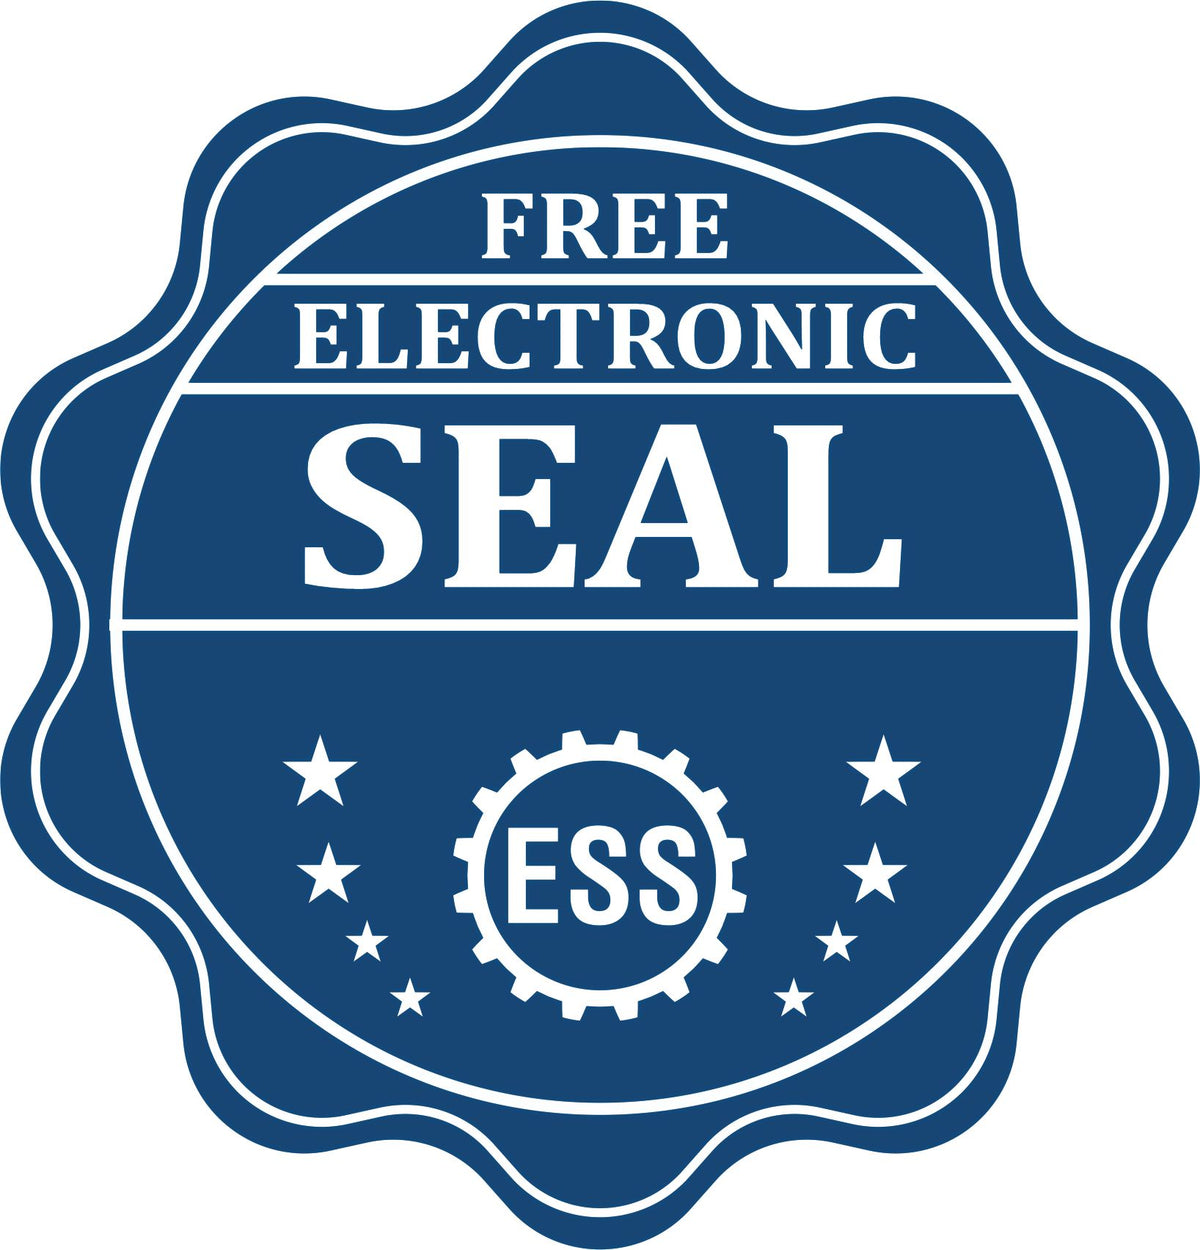 A badge showing a free electronic seal for the Pennsylvania Engineer Desk Seal with stars and the ESS gear on the emblem.